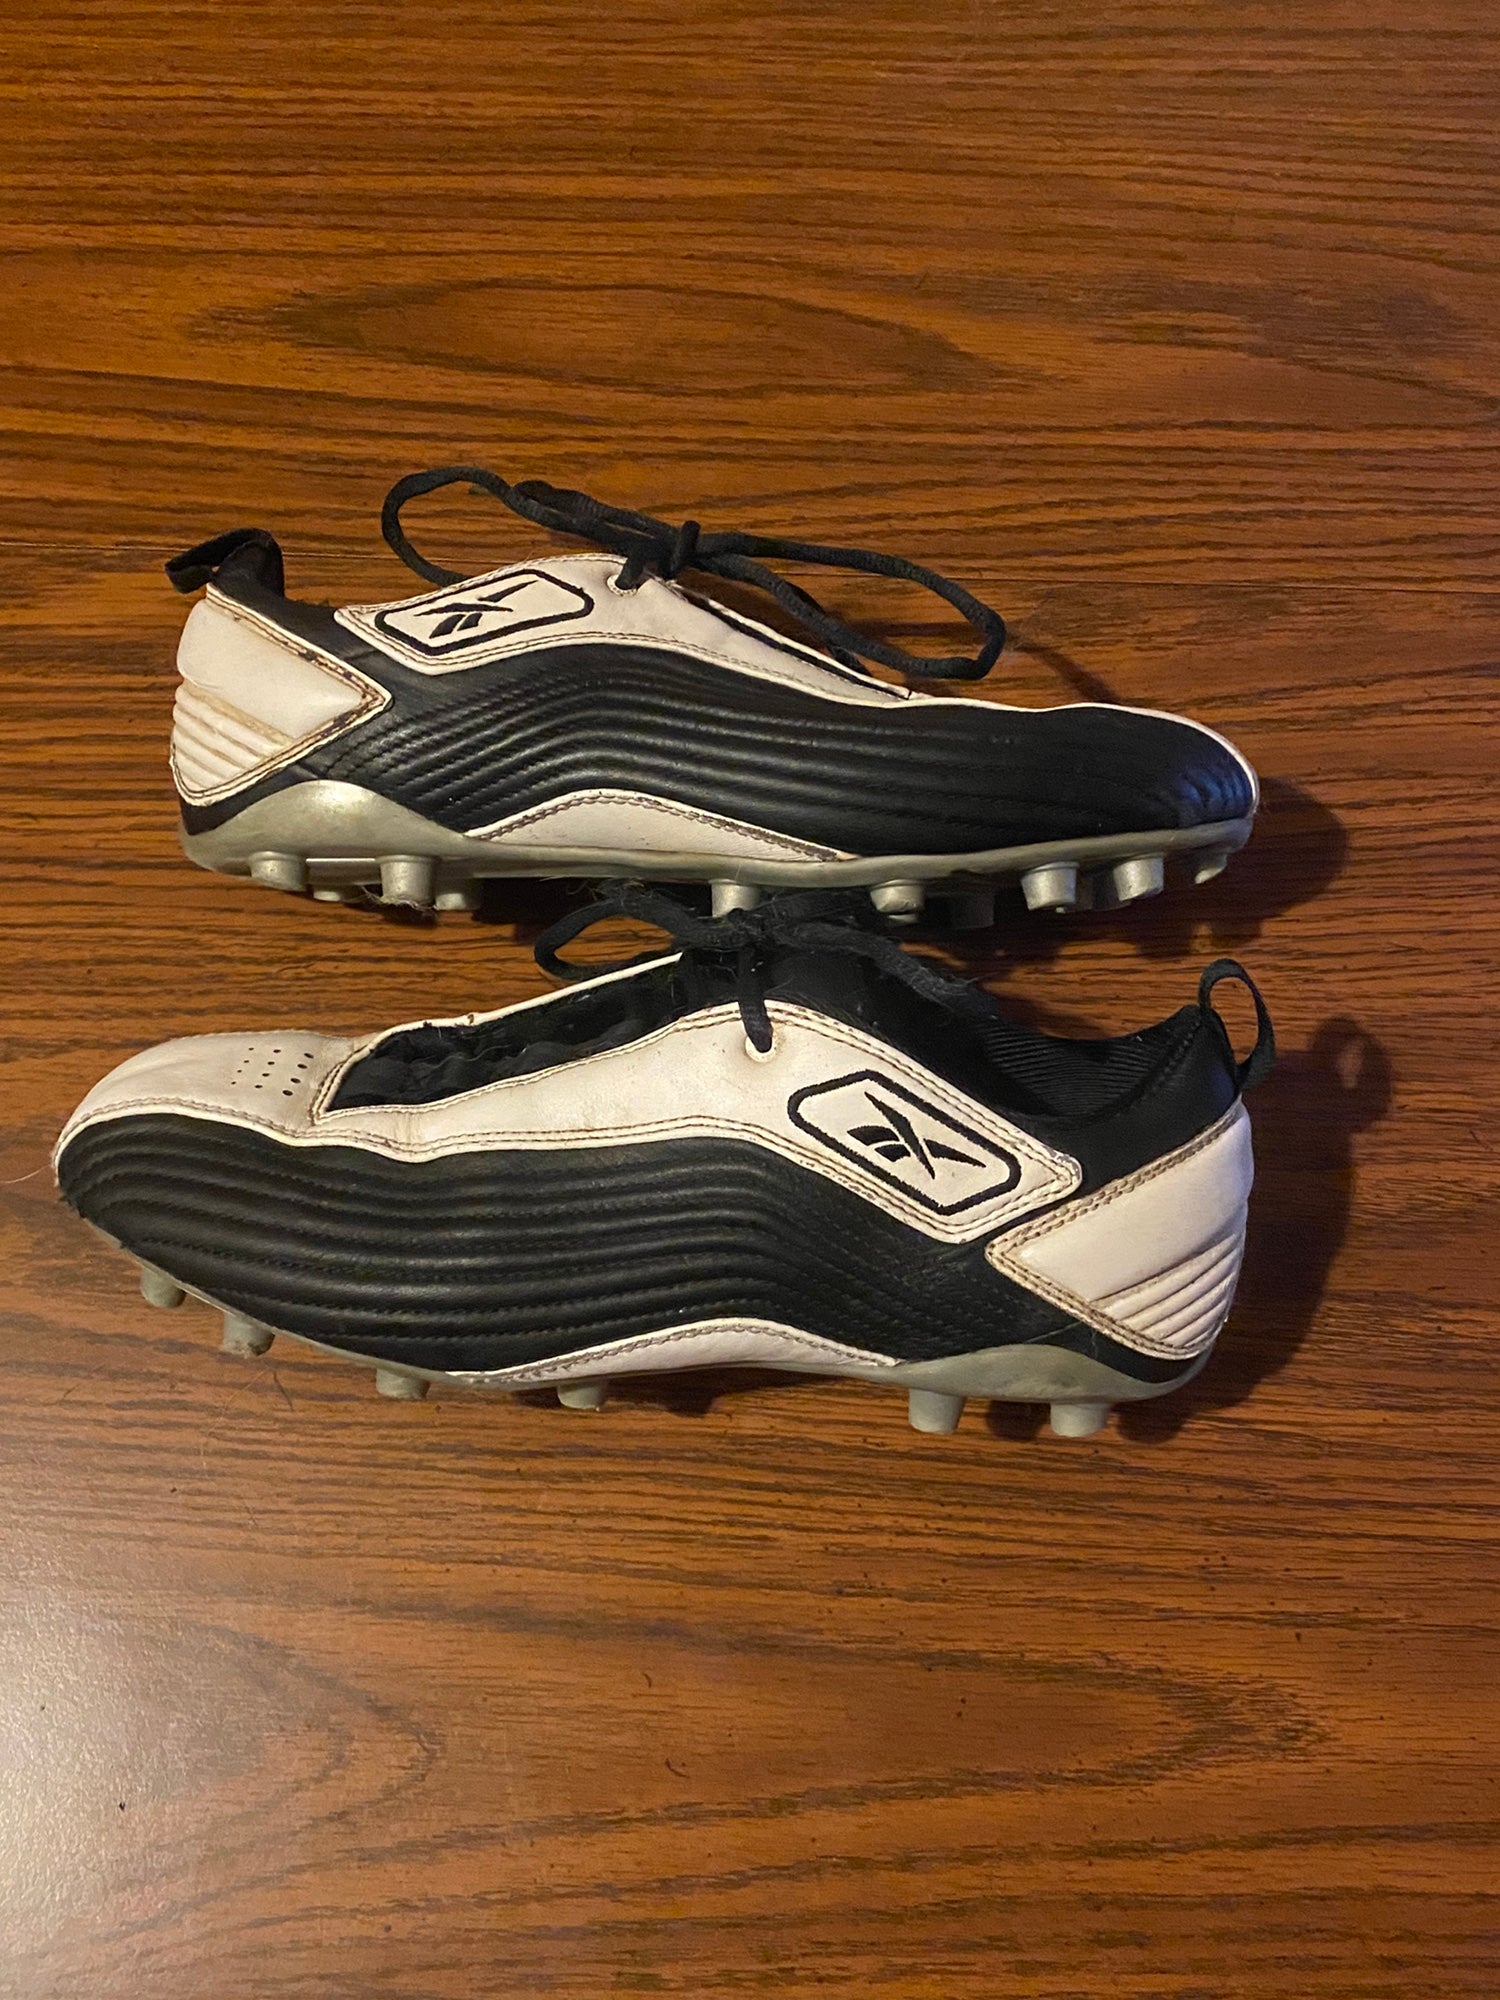 Details about   NEW REEBOK Black Workhorse MPB FOOTBALL CLEATS shoes YOUTH Boys 2.5 4.5 NIB 4 